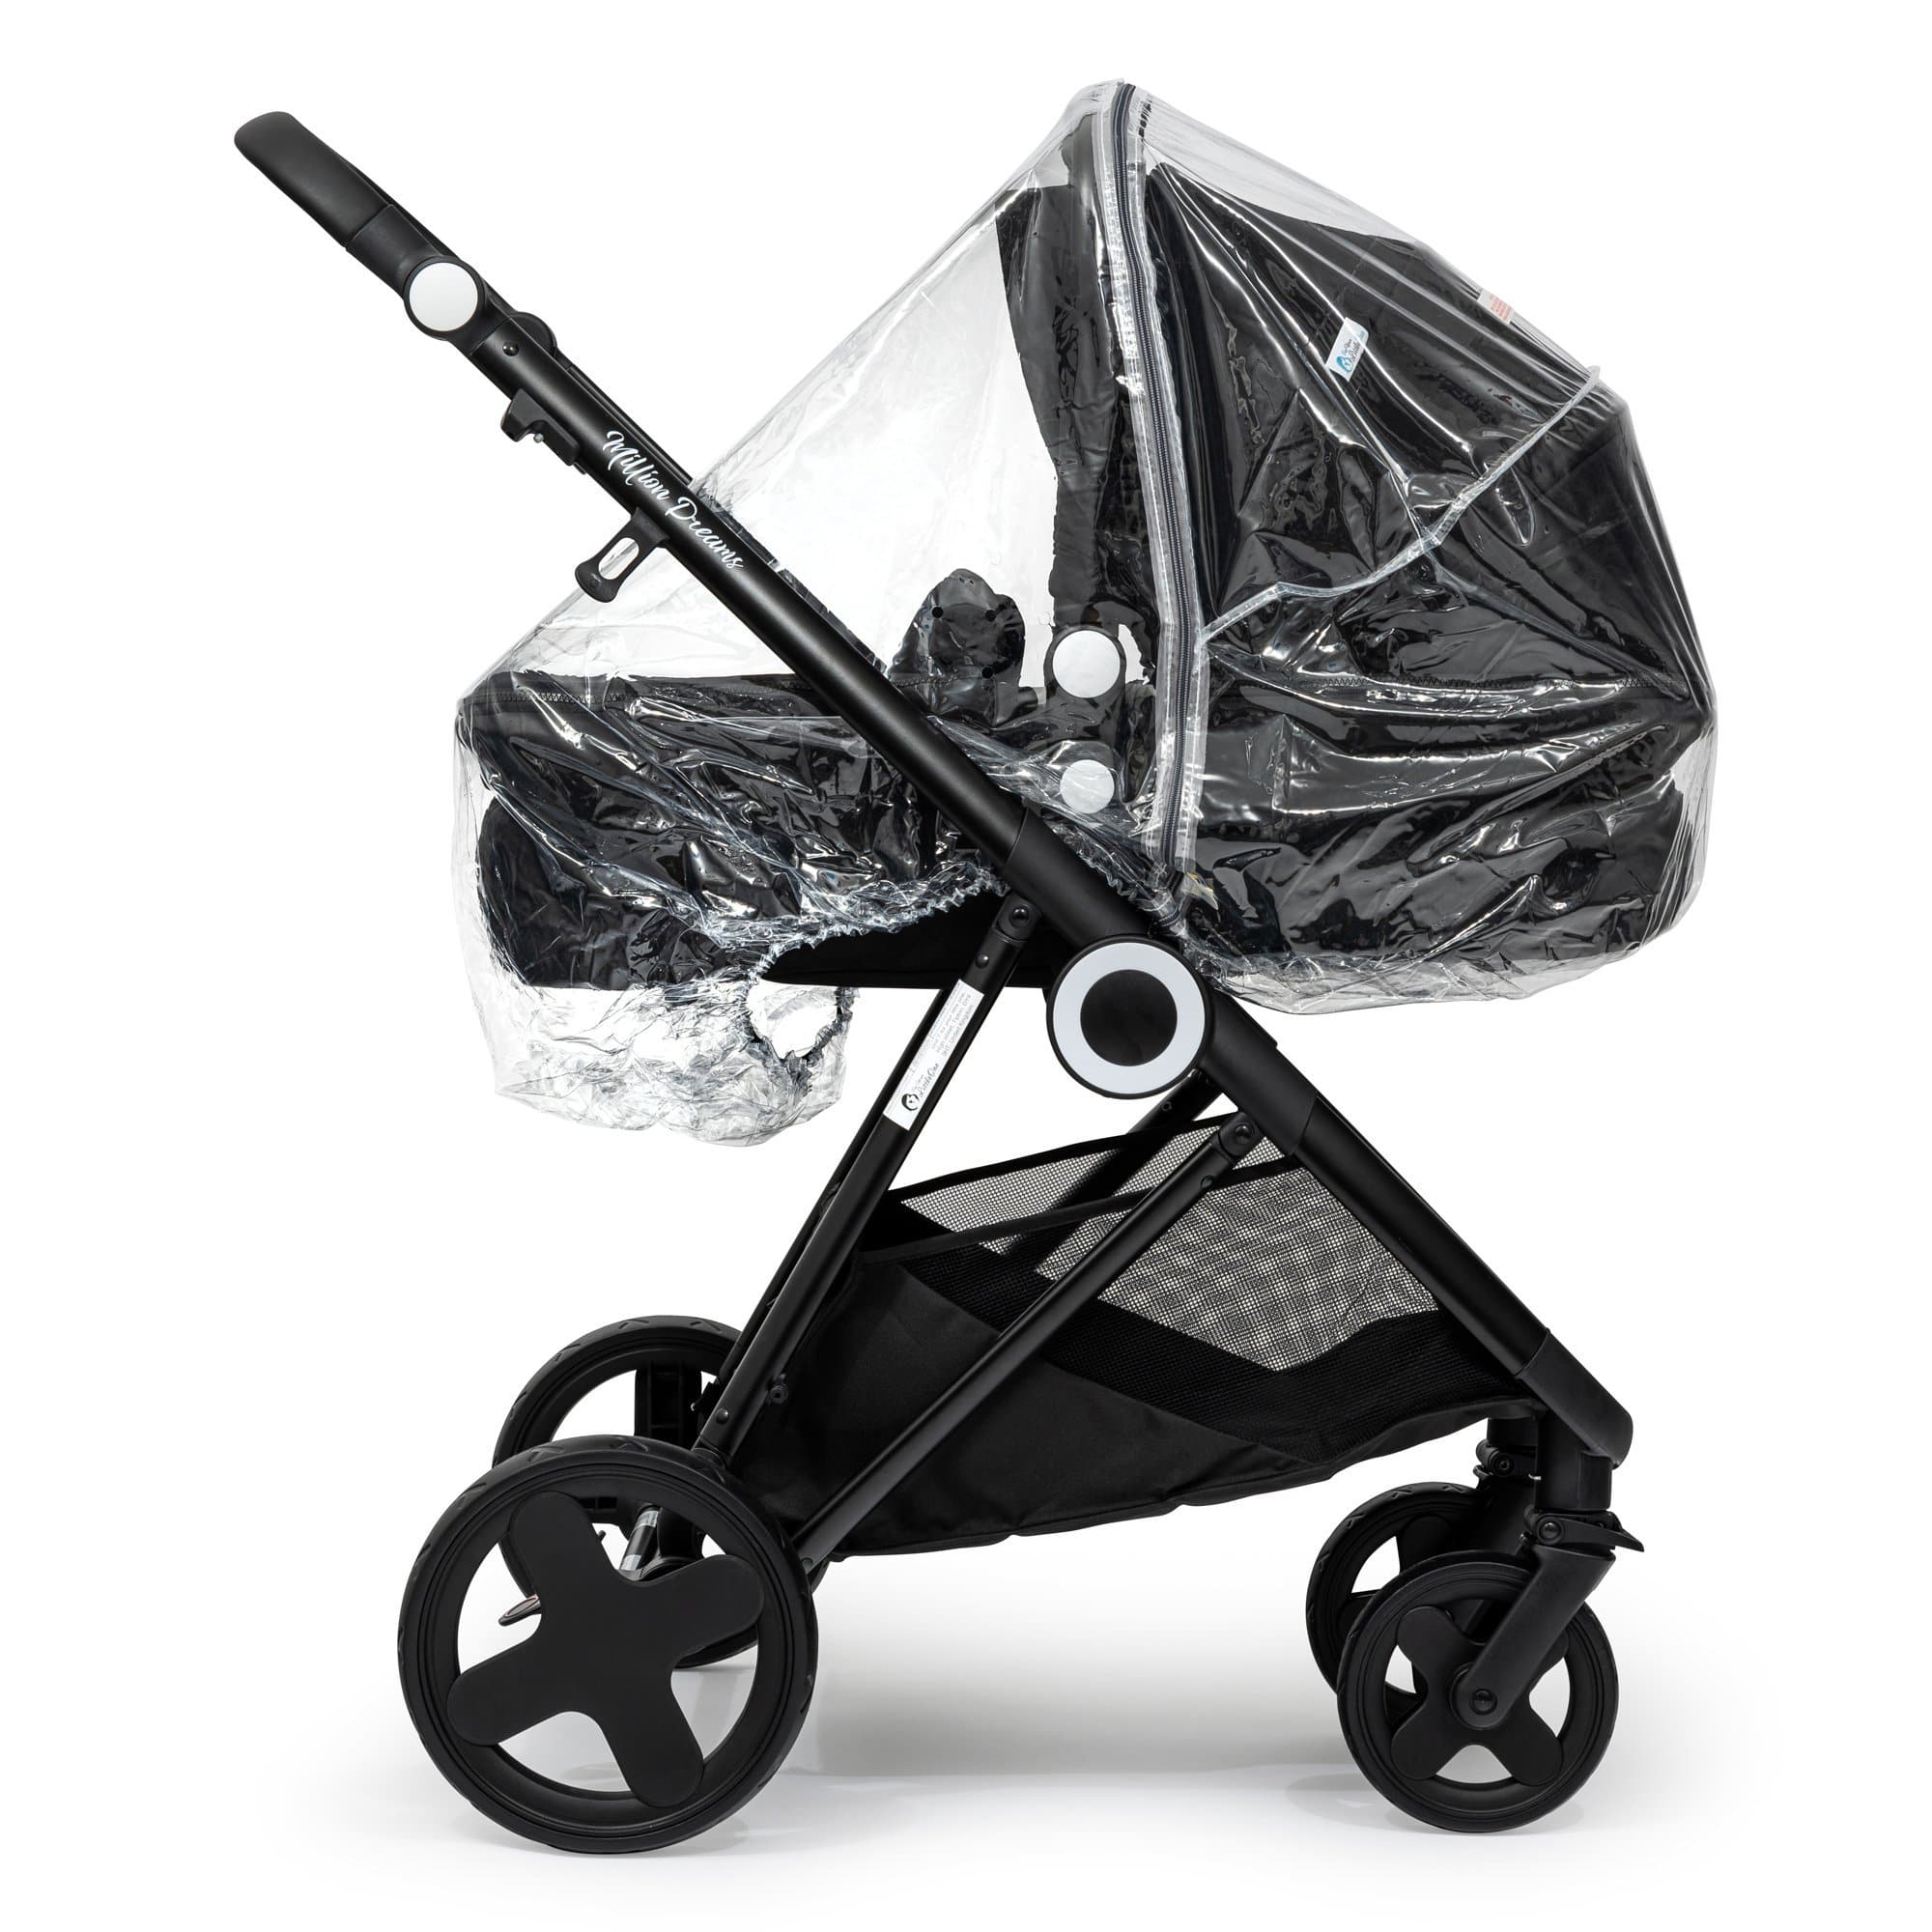 2 in 1 Rain Cover Compatible with Roma - Fits All Models - For Your Little One